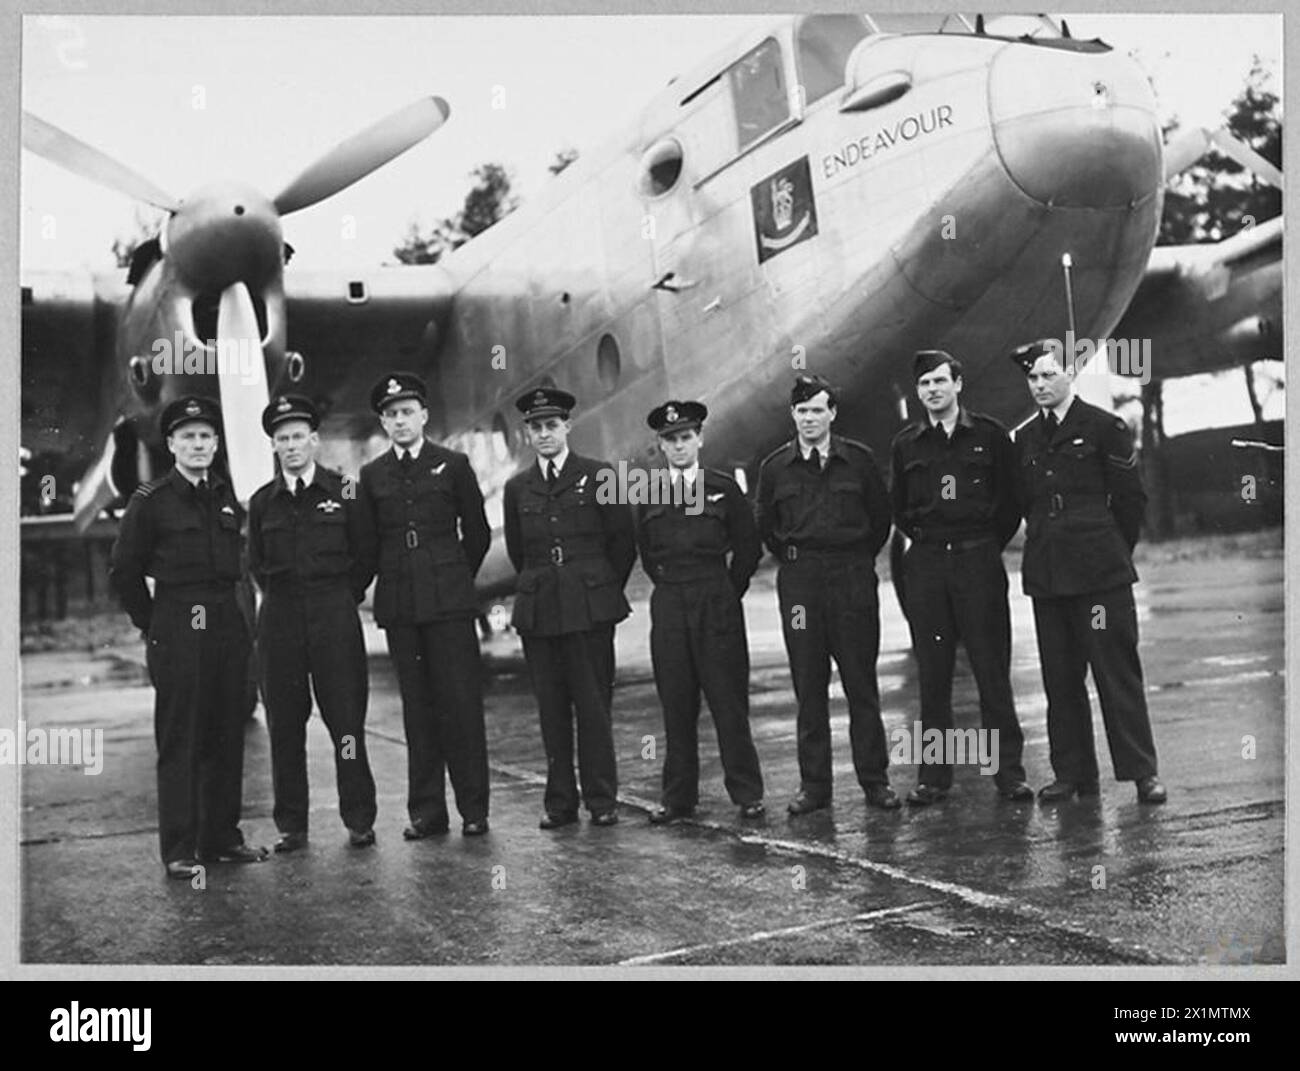 THE DUKE OF GLOUCESTER'S YORK AIRCRAFT - For introduction see CH.14653. Picture (issued 1945) shows - The full crew of the York aircraft - left to right - Wing Commander D.R.Donaldson - Captain of the Duke's flight; Flight Lieutenant J.A. Critchley, DFC - Second Pilot Flying Officer J.G. Earl - Navigator; Flying Officer K.W. Miller - Flight Engineer; Pilot Officer L.E. Wolldon - Wireless Operator; Sergeant P.G. Allan - Fitter; Corporal S.N.Robertson - Rigger; Corporal J.A. Houston - Steward. It is an all-Australian crew, Royal Air Force Stock Photo